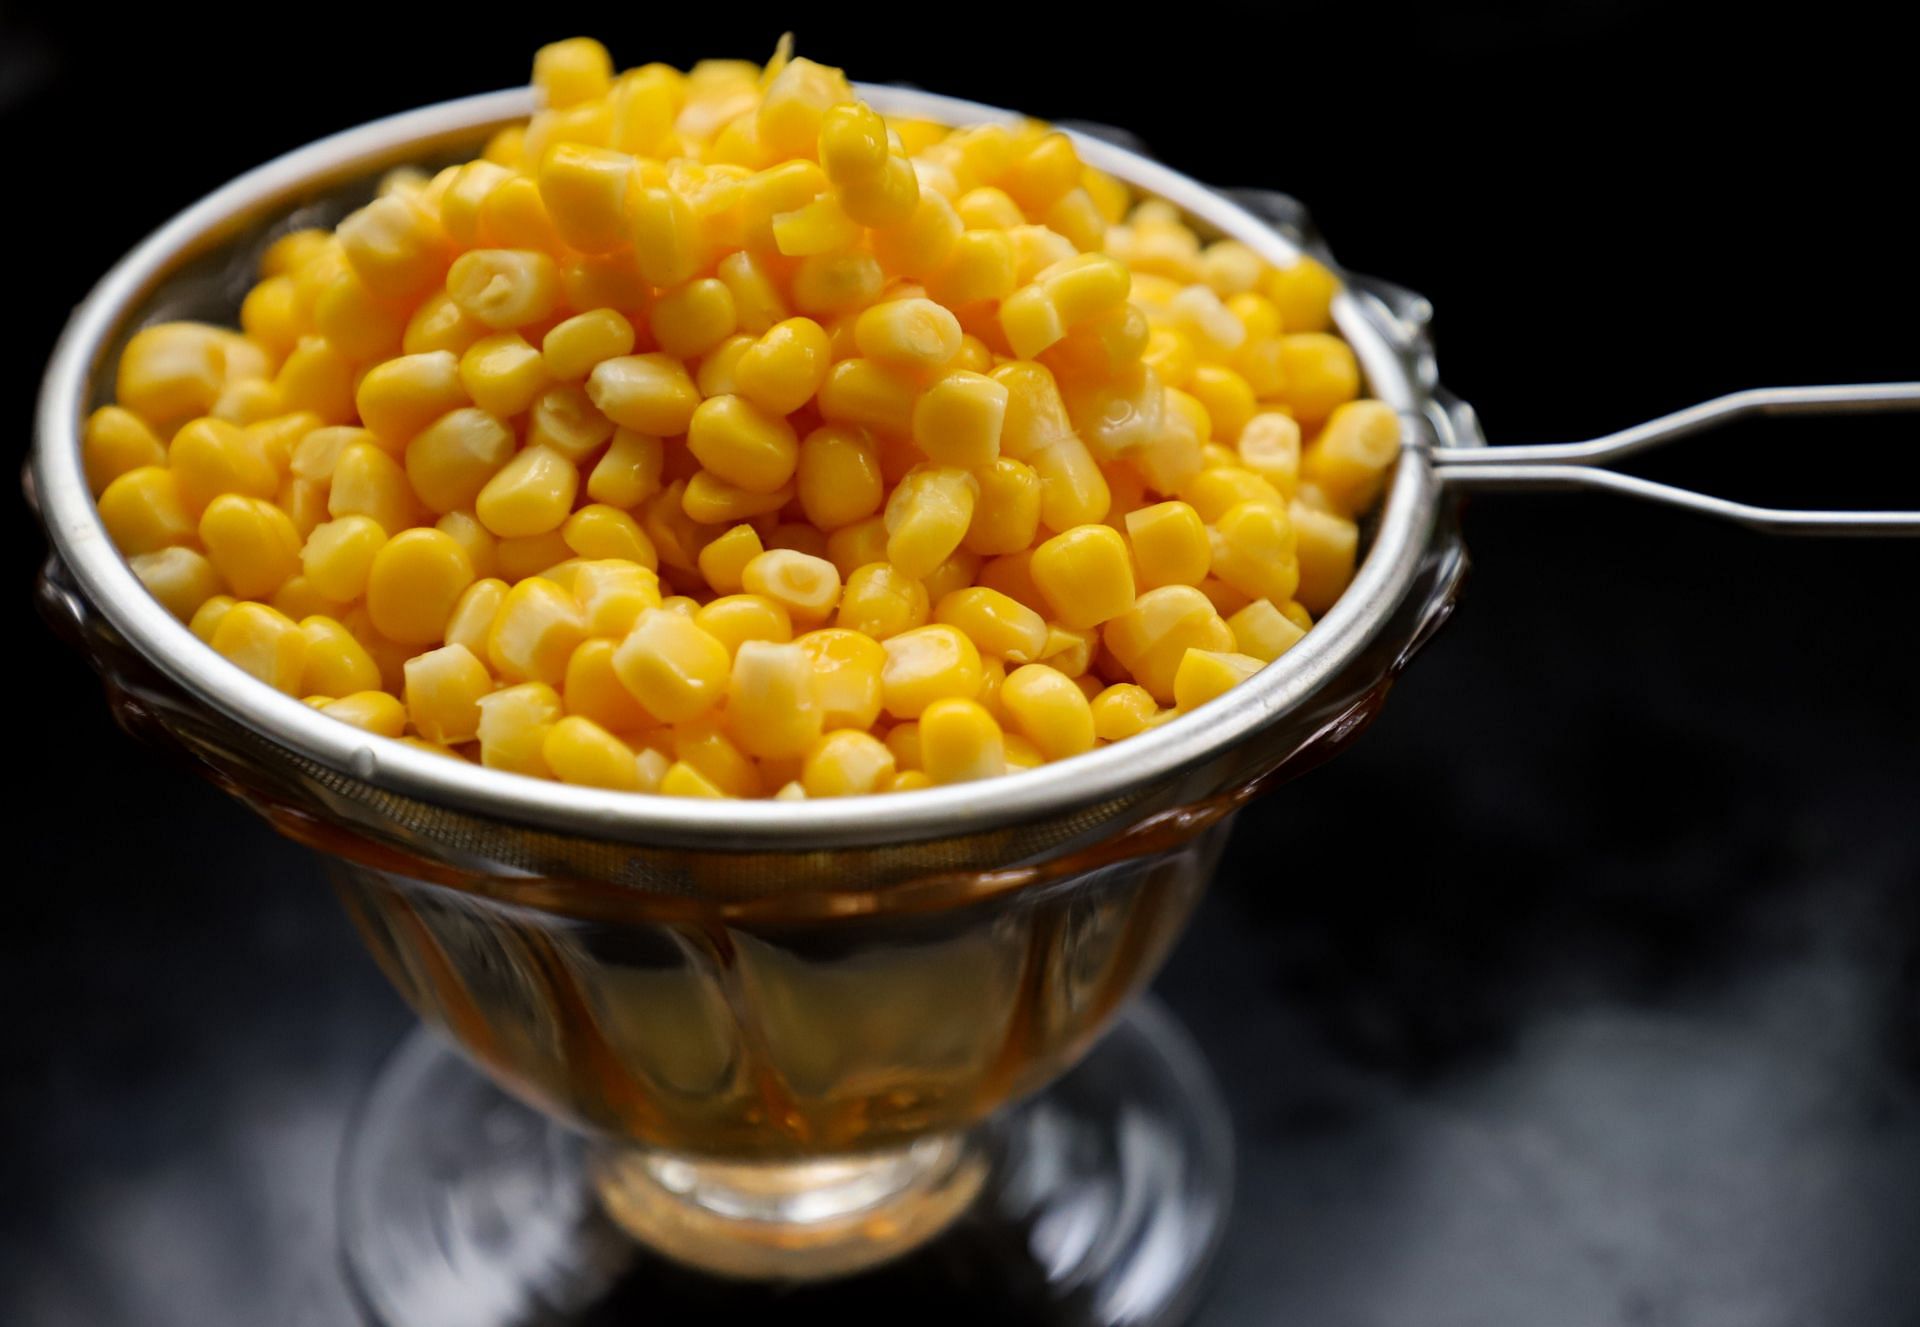 Corn is the worst vegetable for weight loss (Image sourced via Pexels / Photo by cats-coming)